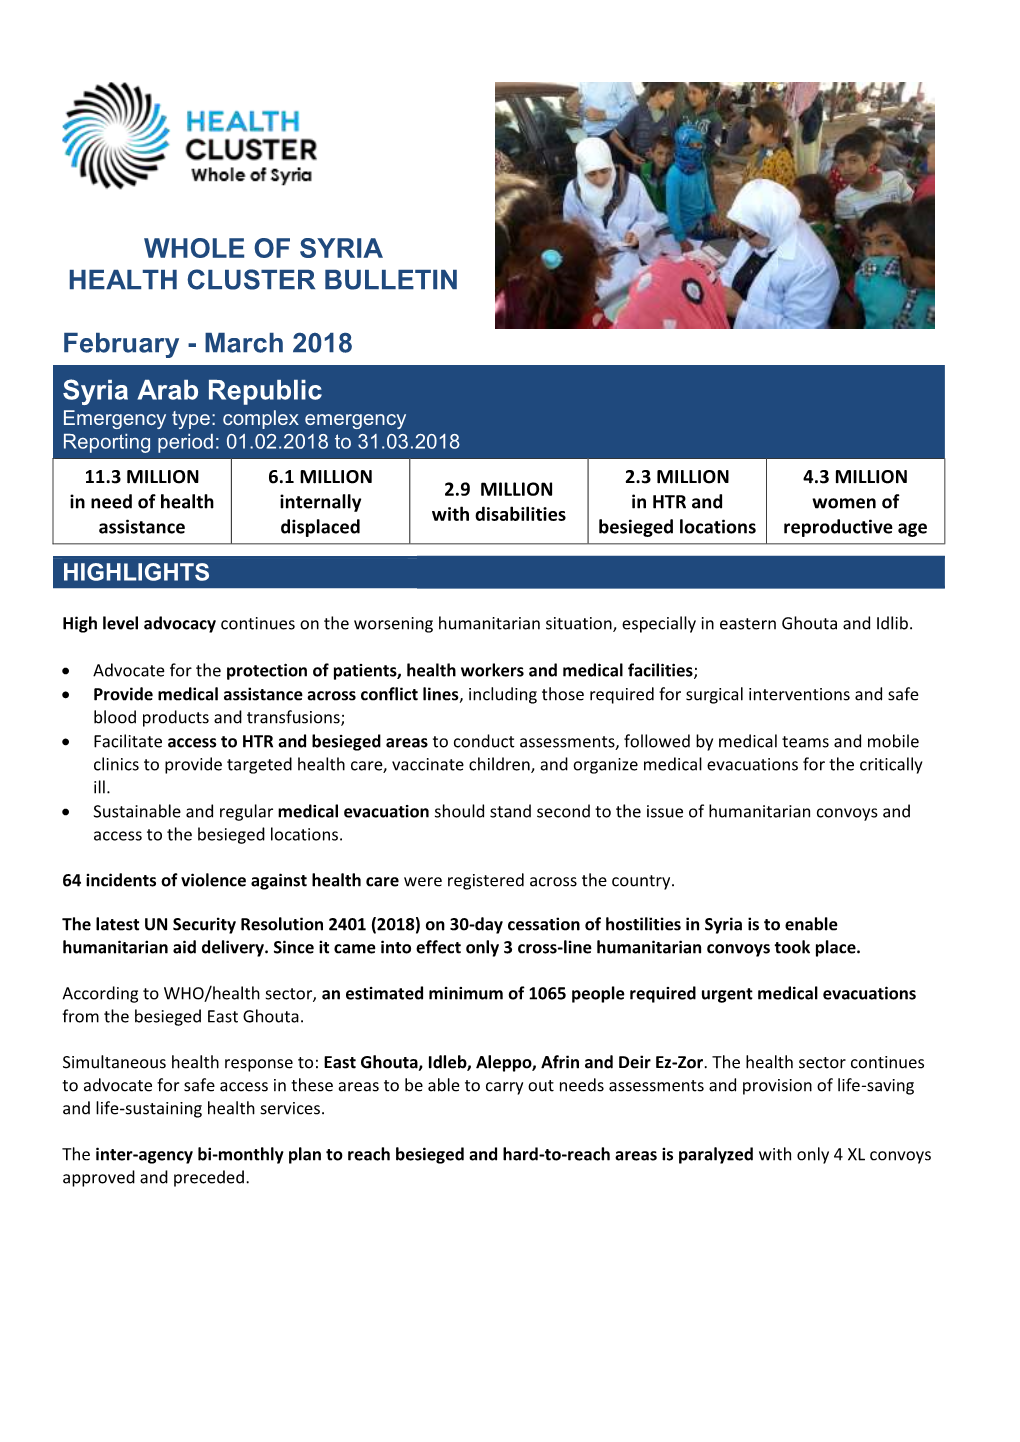 WHOLE of SYRIA HEALTH CLUSTER BULLETIN February - March 2018